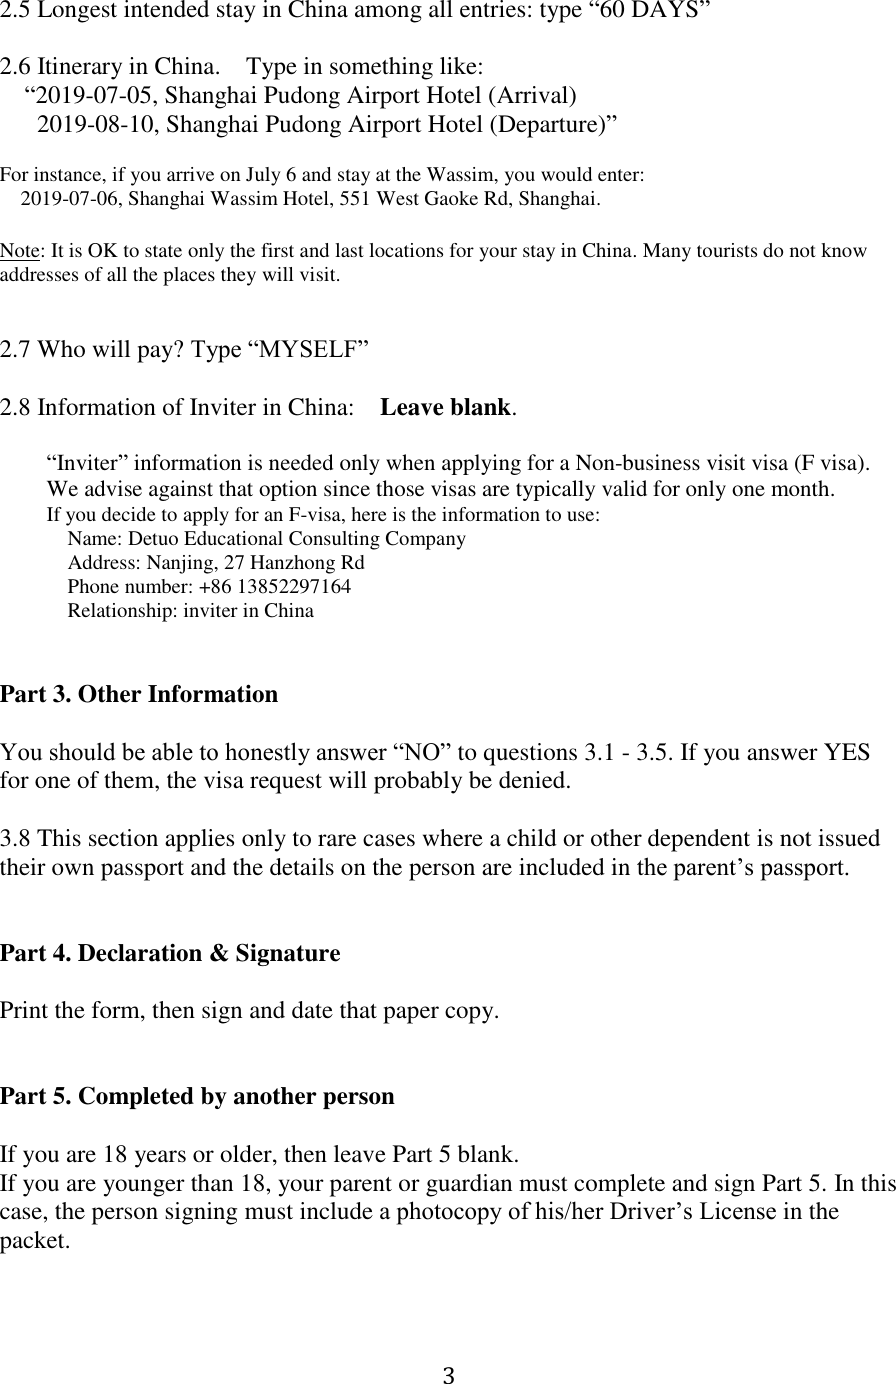 Page 3 of 3 - Instructions-for-visa-application-form